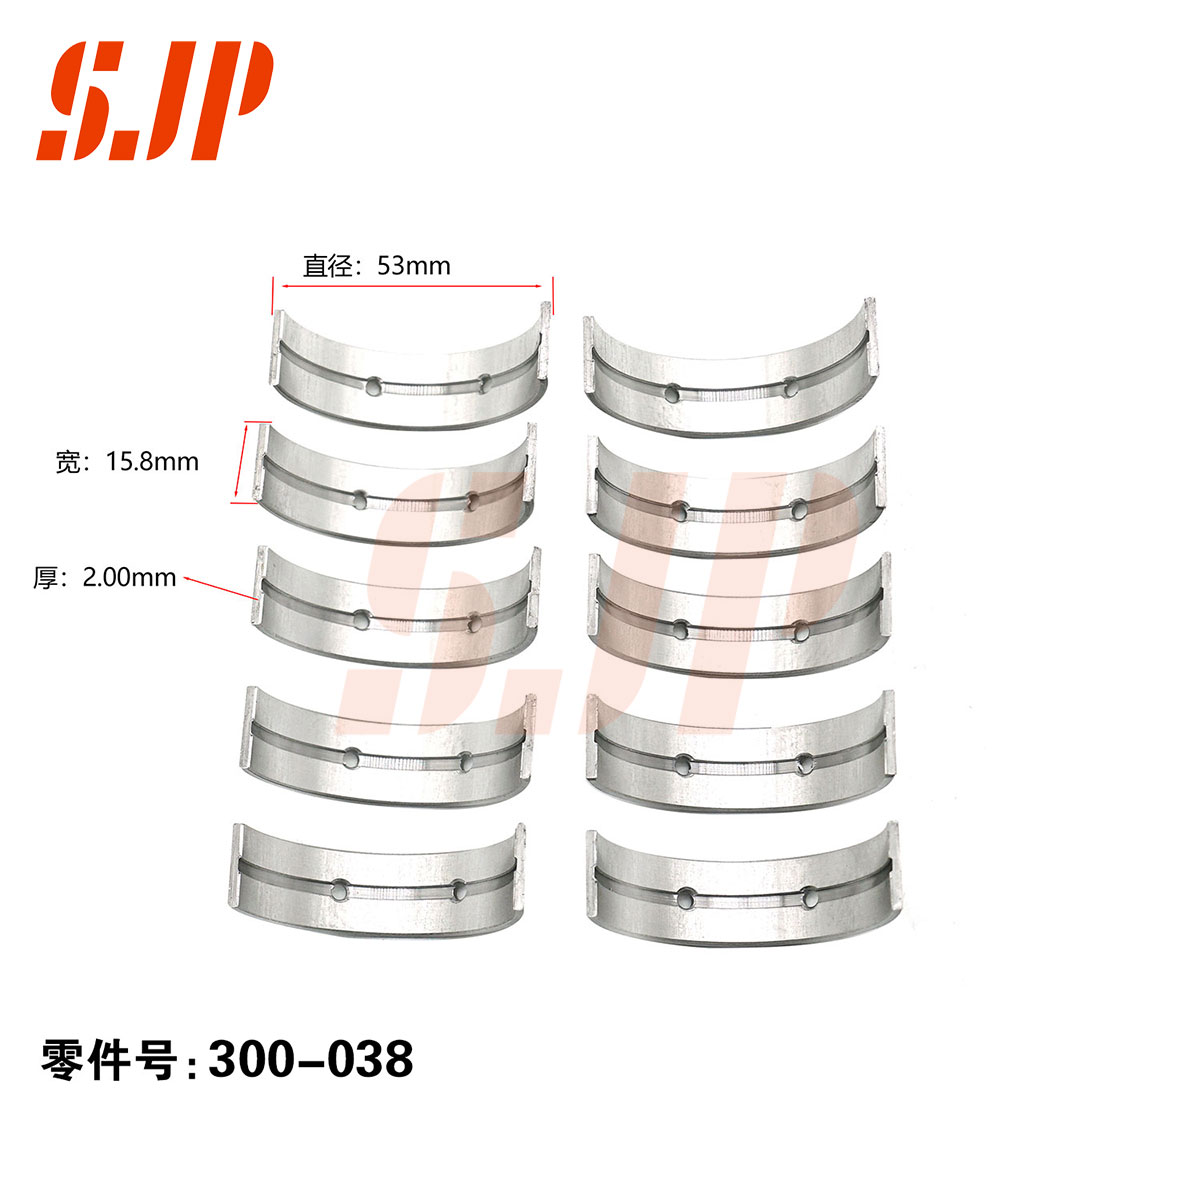 SJ-300-038 Main Bearing Set For HR16/S30/A60/L60 DongFeng Aeolus 1.6